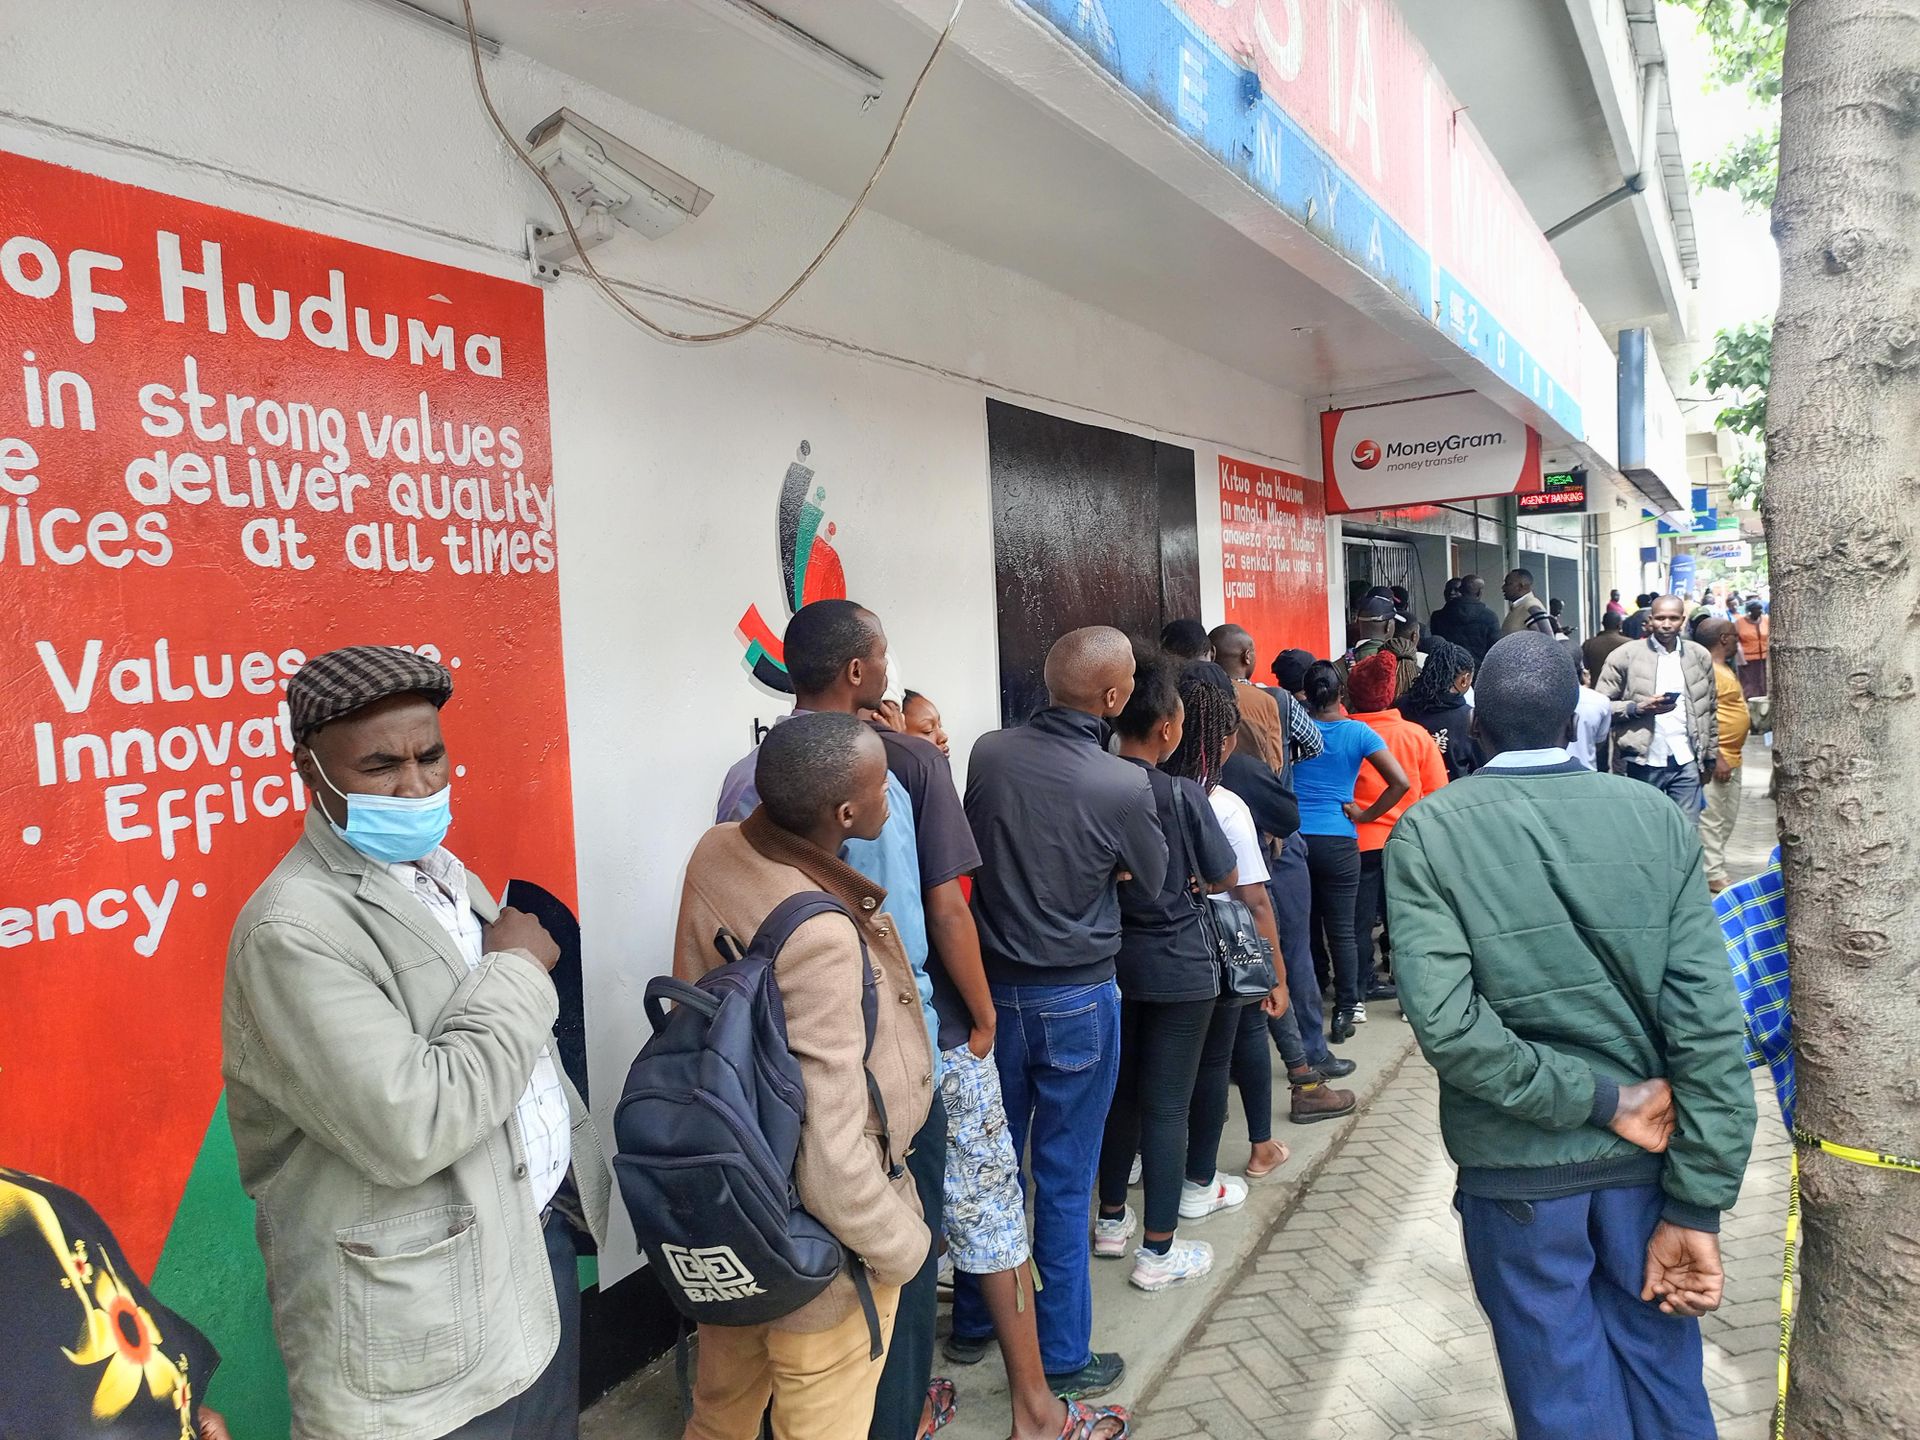 Why plans to open a second Huduma center in Nakuru have stalled